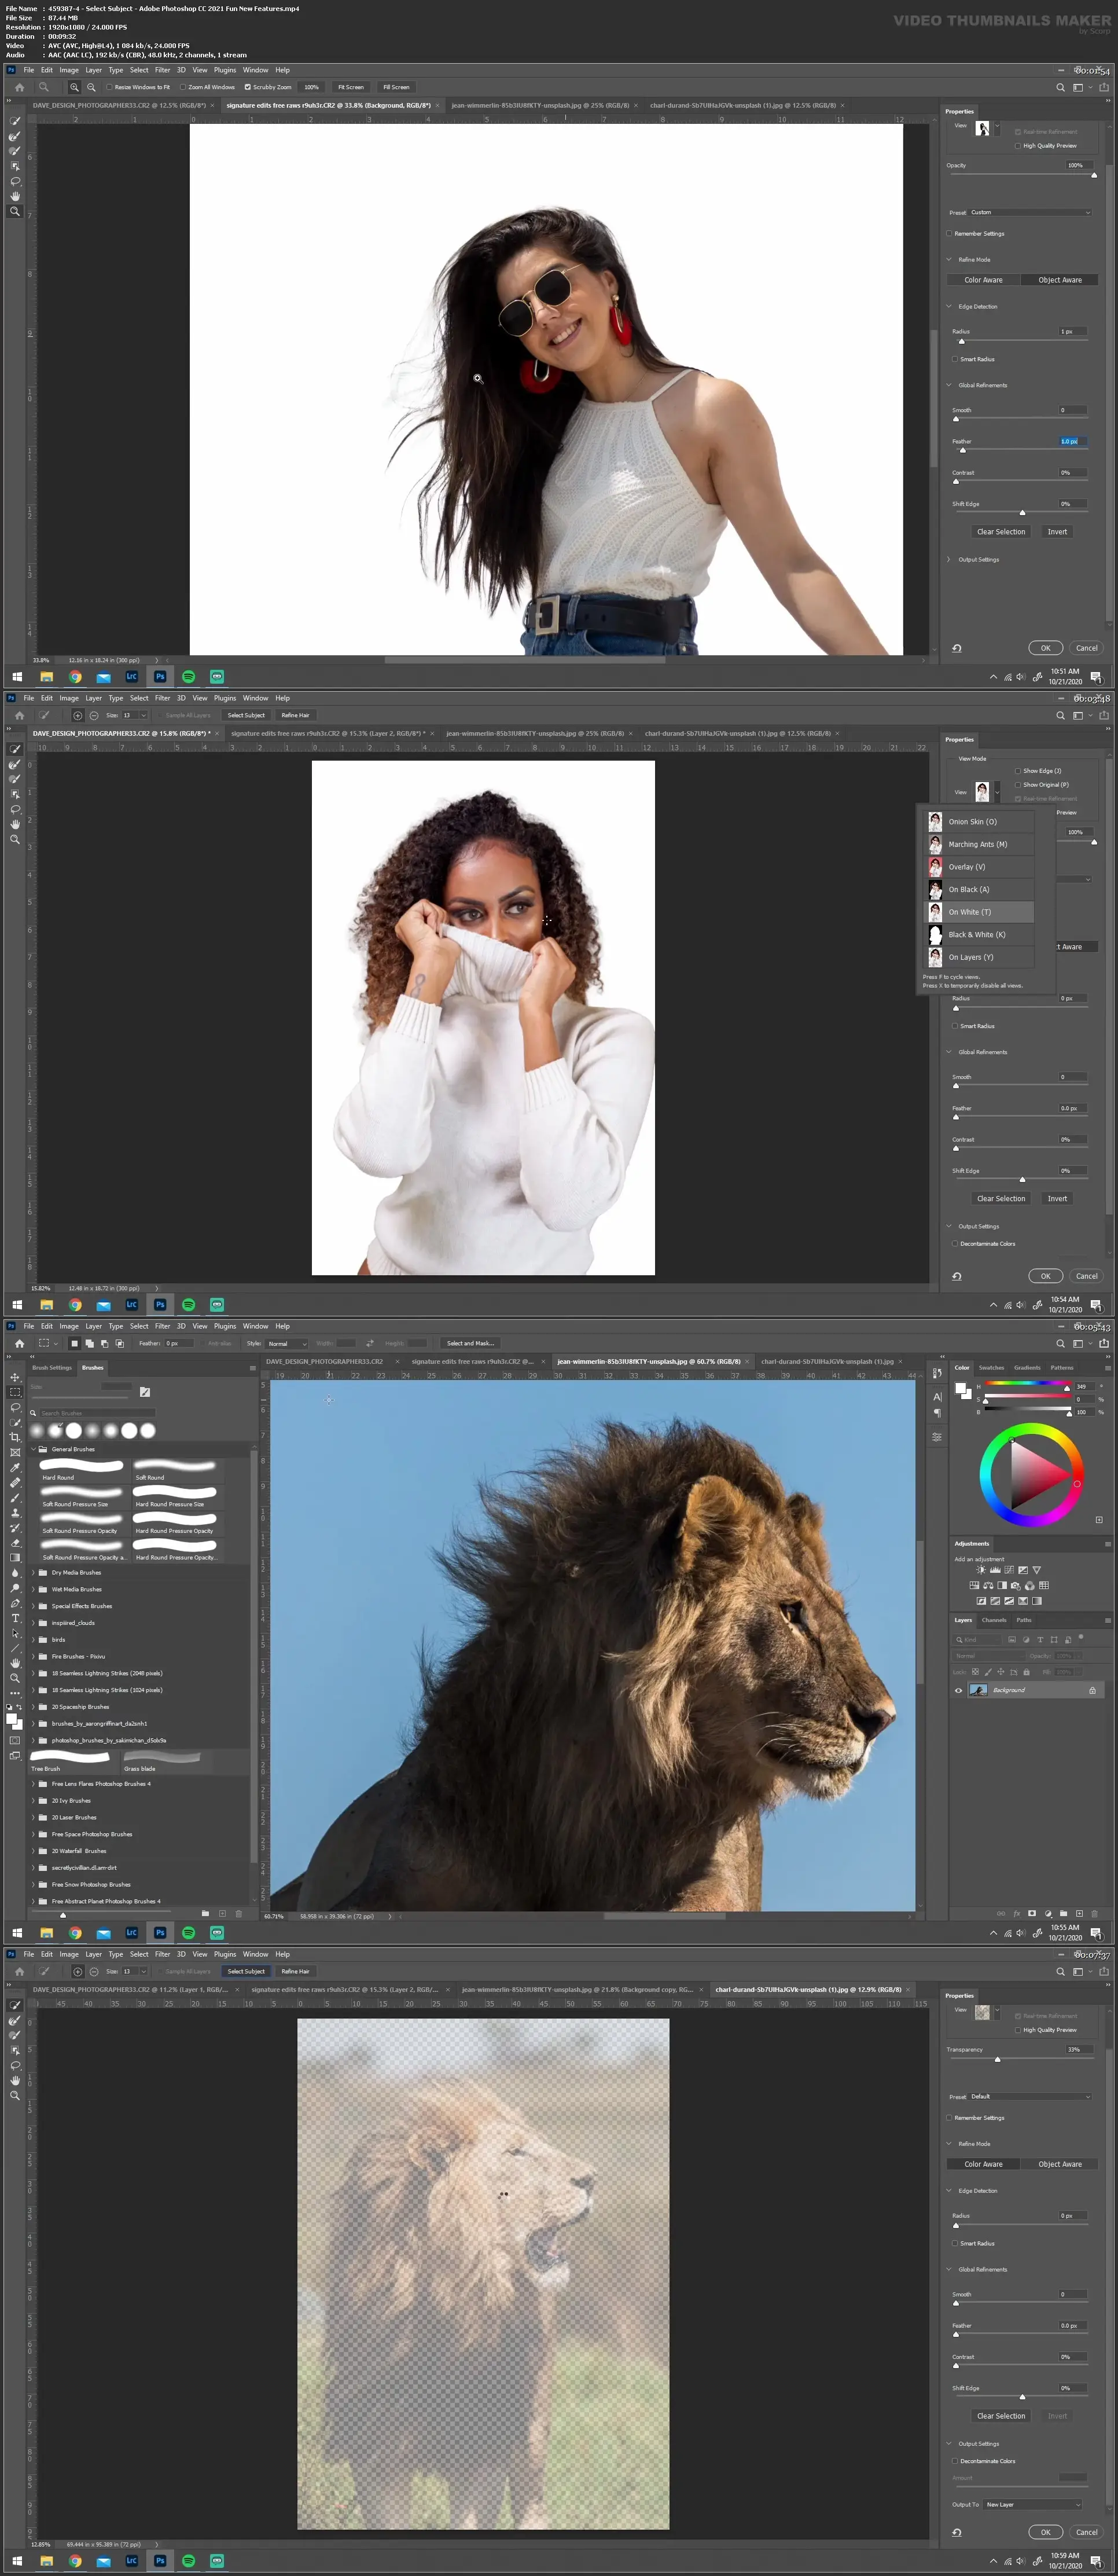 adobe photoshop cc 2021 free download for lifetime